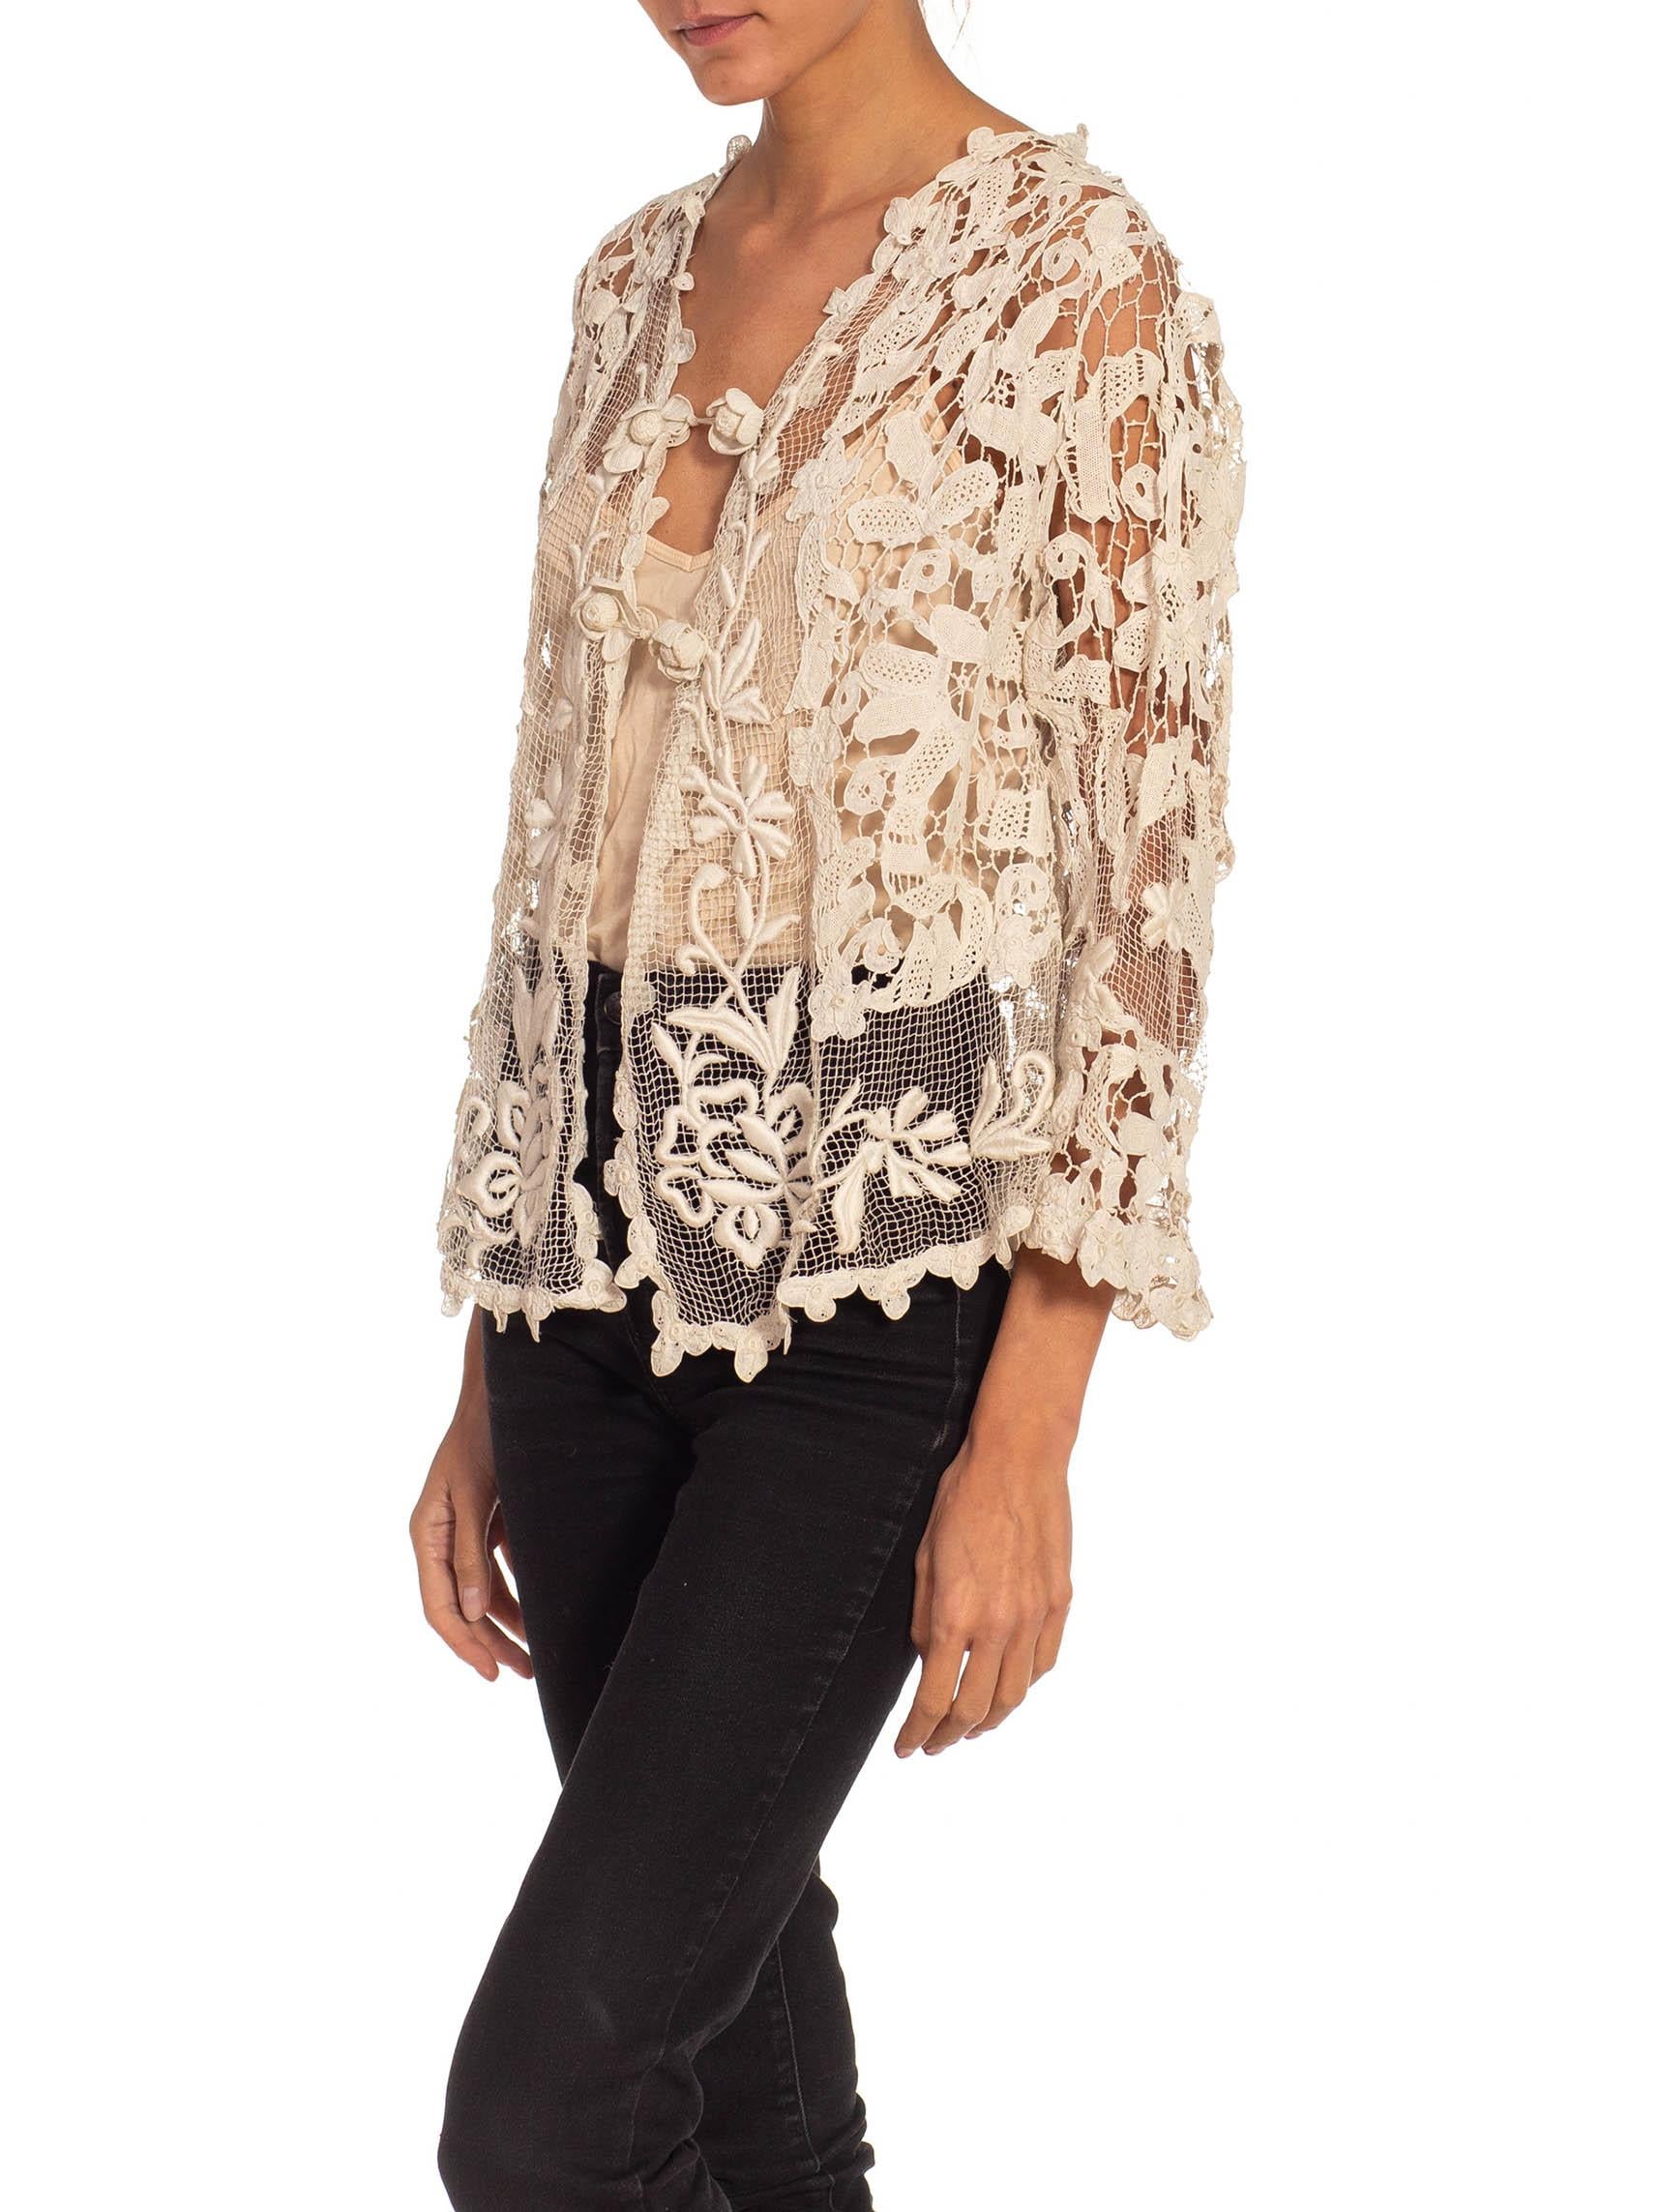 Victorian Off White Needle Lace Long Sleeve Jacket With Flower Hooks For Sale 4